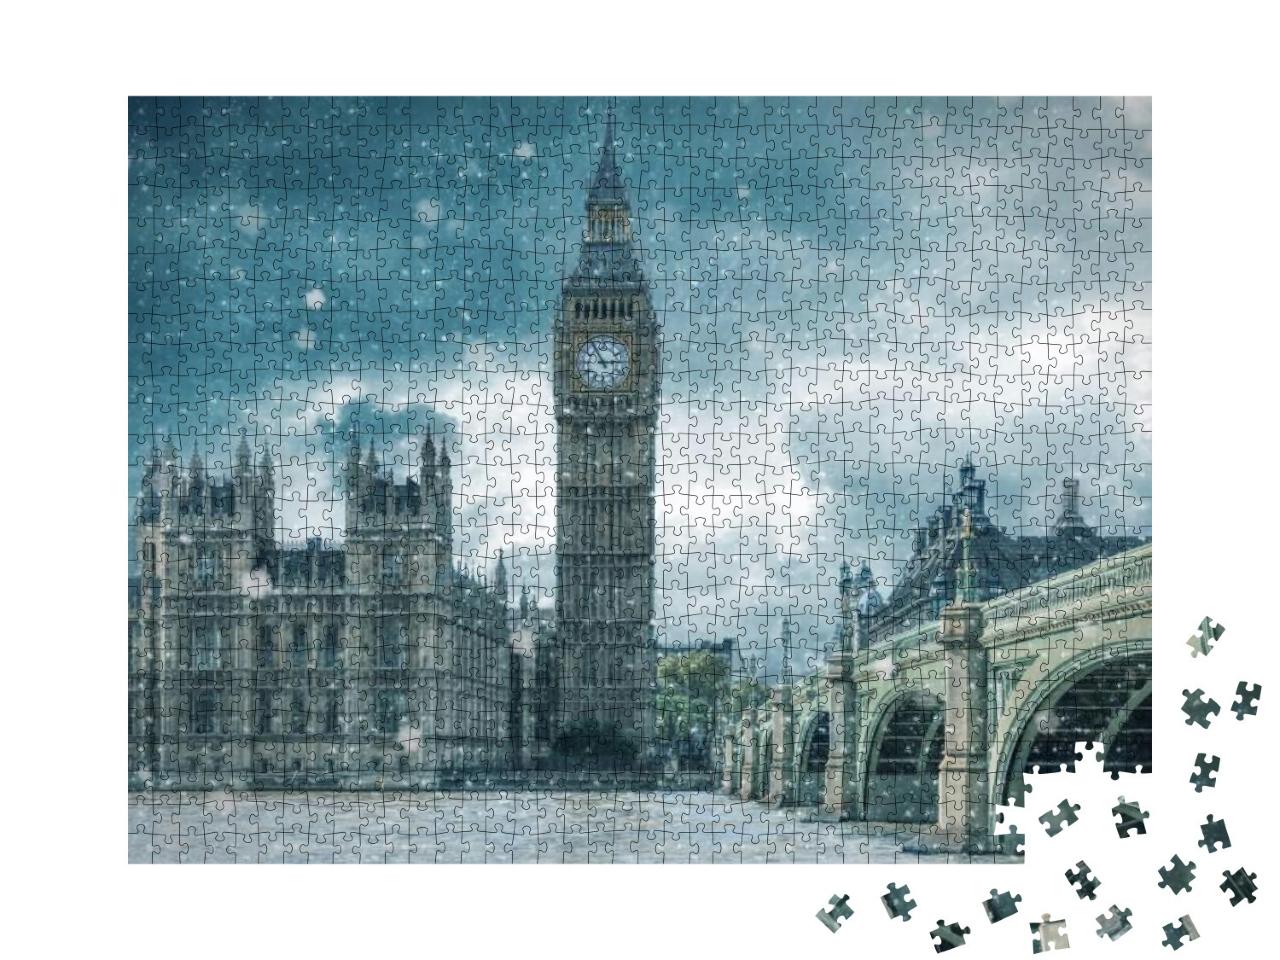 Big Ben & Westminster Bridge on a Cold, Snowy Winter Day... Jigsaw Puzzle with 1000 pieces